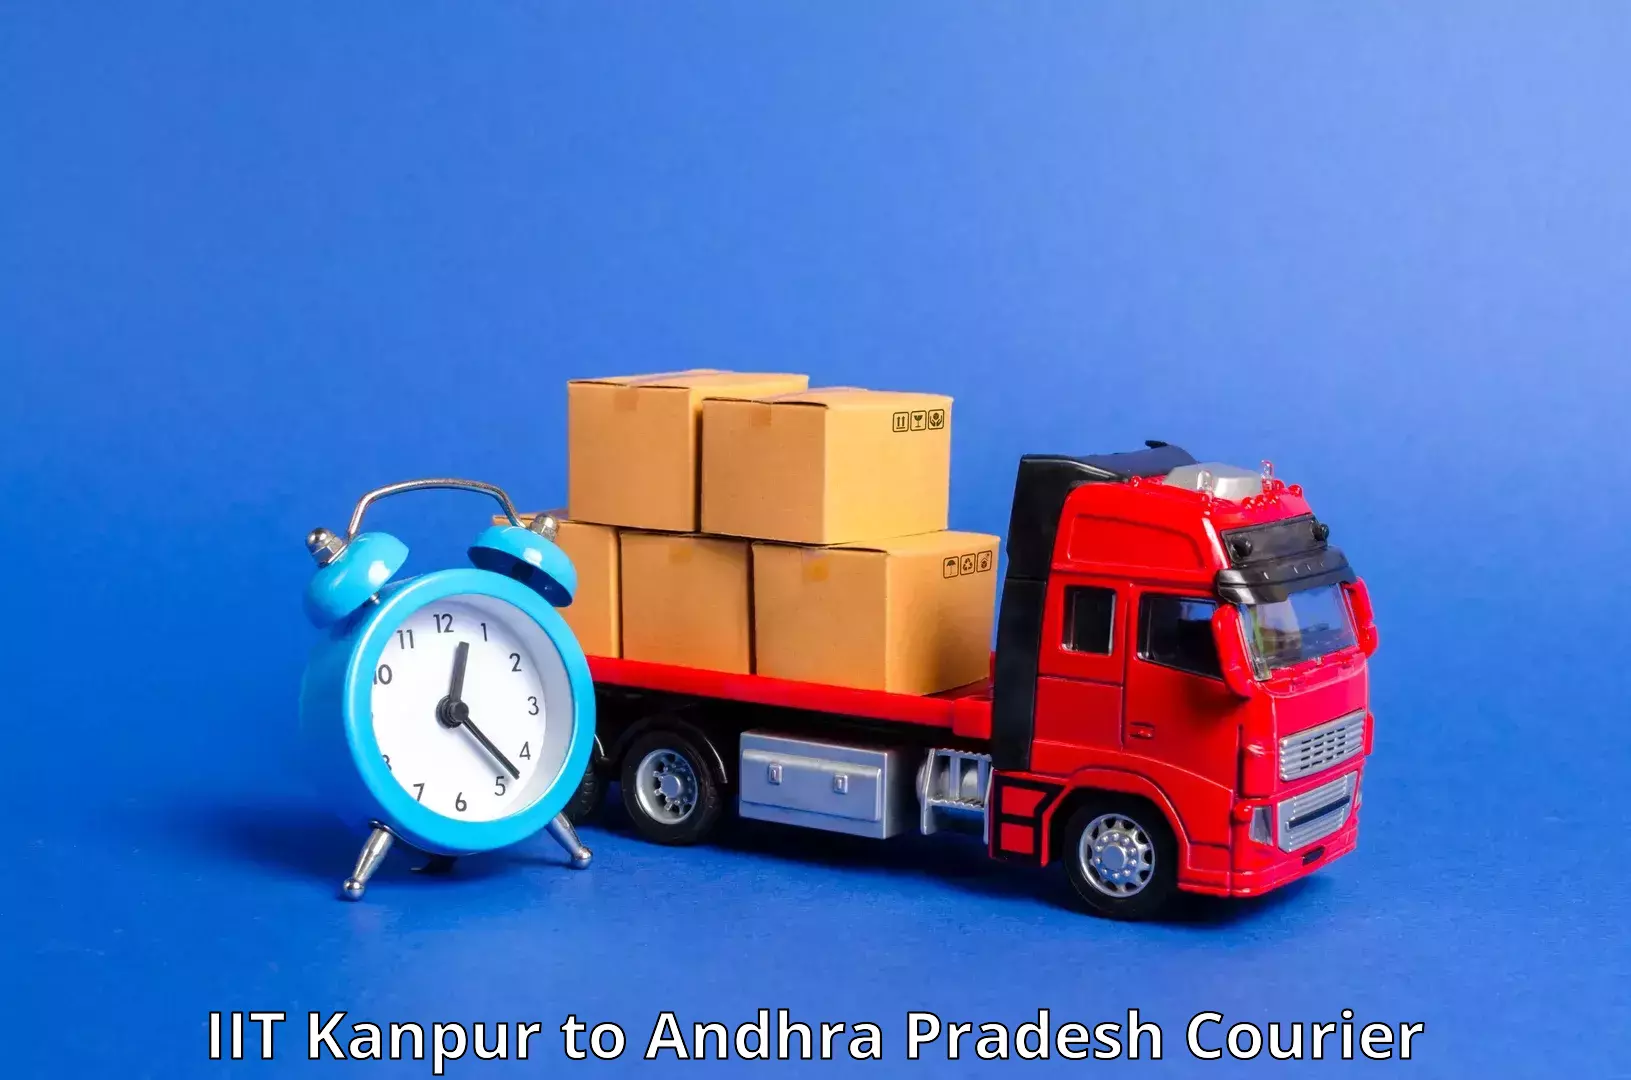 24-hour courier services IIT Kanpur to IIT Tirupati